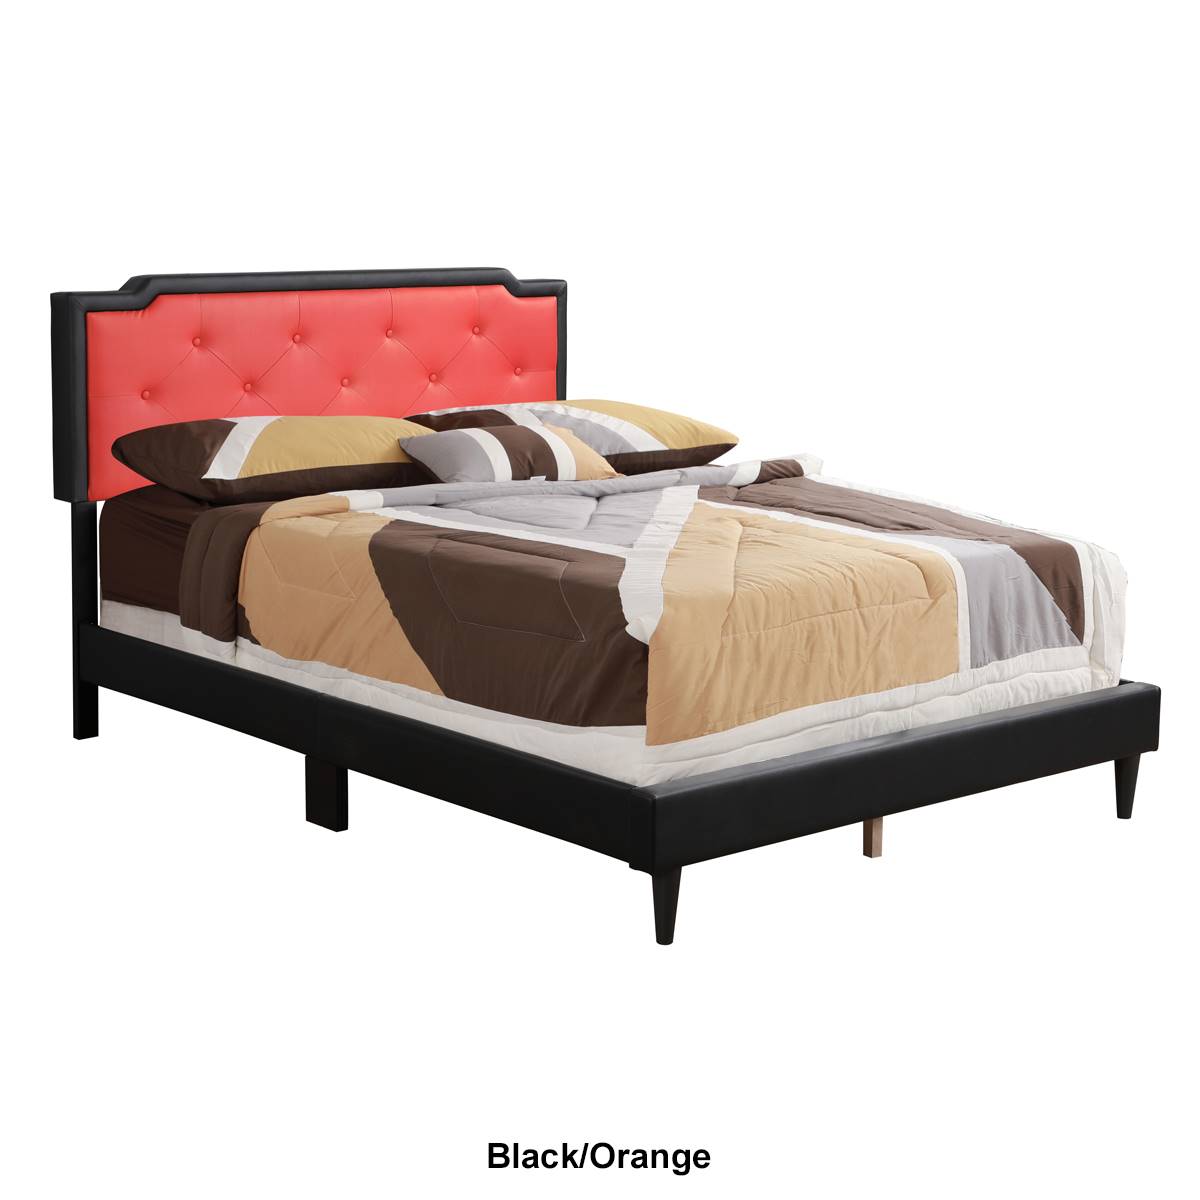 Passion Furniture Deb Jewel Tufted Panel Bed Frame - Full